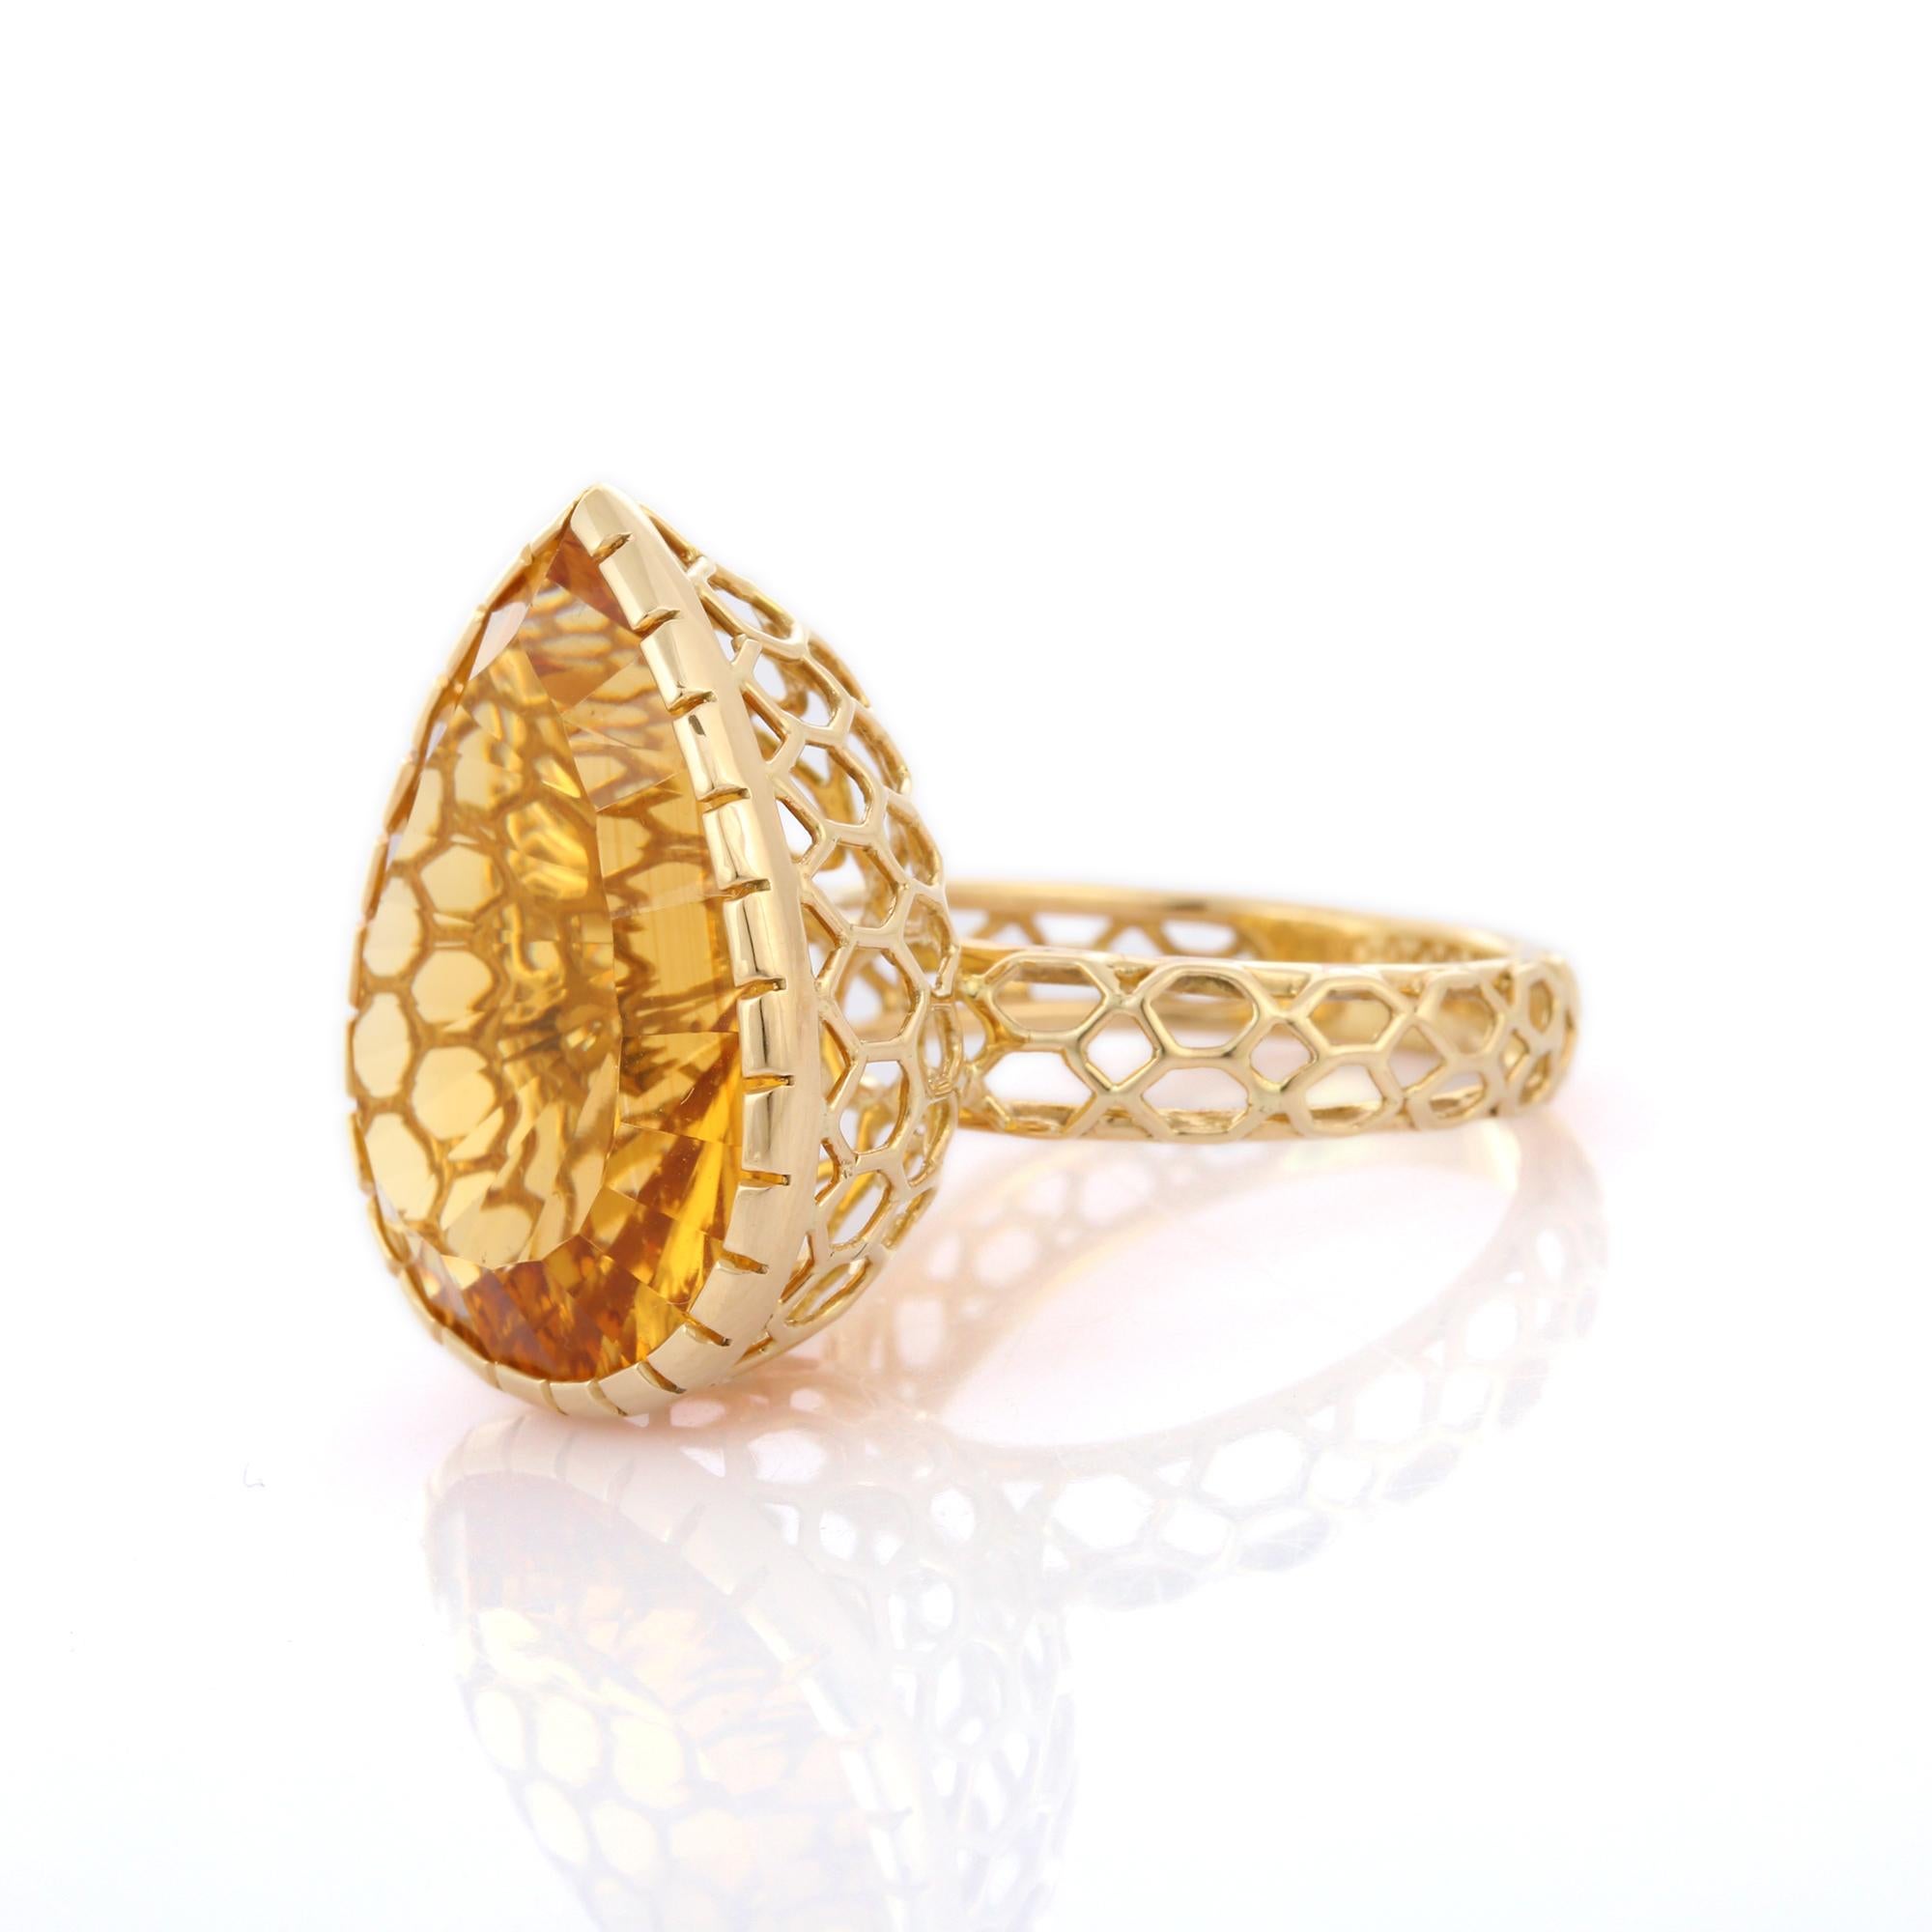 For Sale:  17.95 Carat Citrine Pear Cut Cocktail Ring in 14K Yellow Gold 2